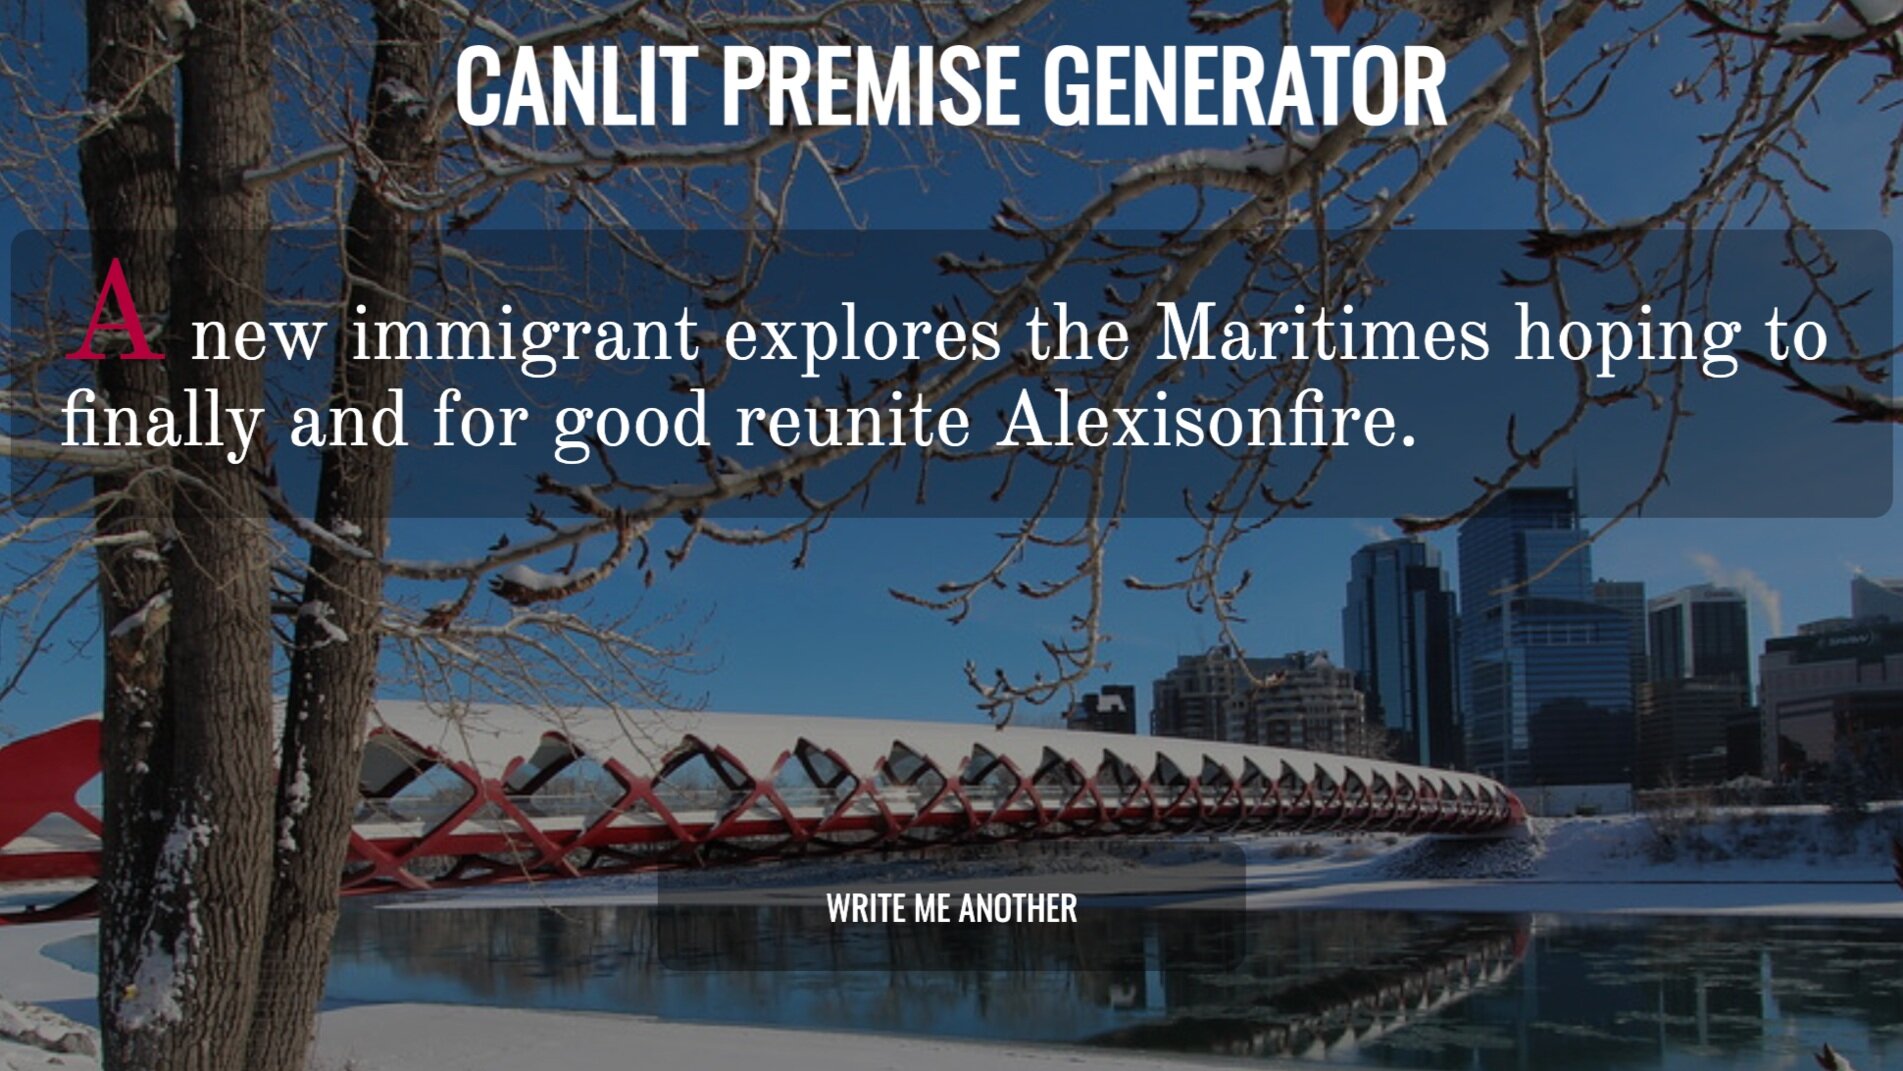 Find Inspiration with the CanLit Premise Generator